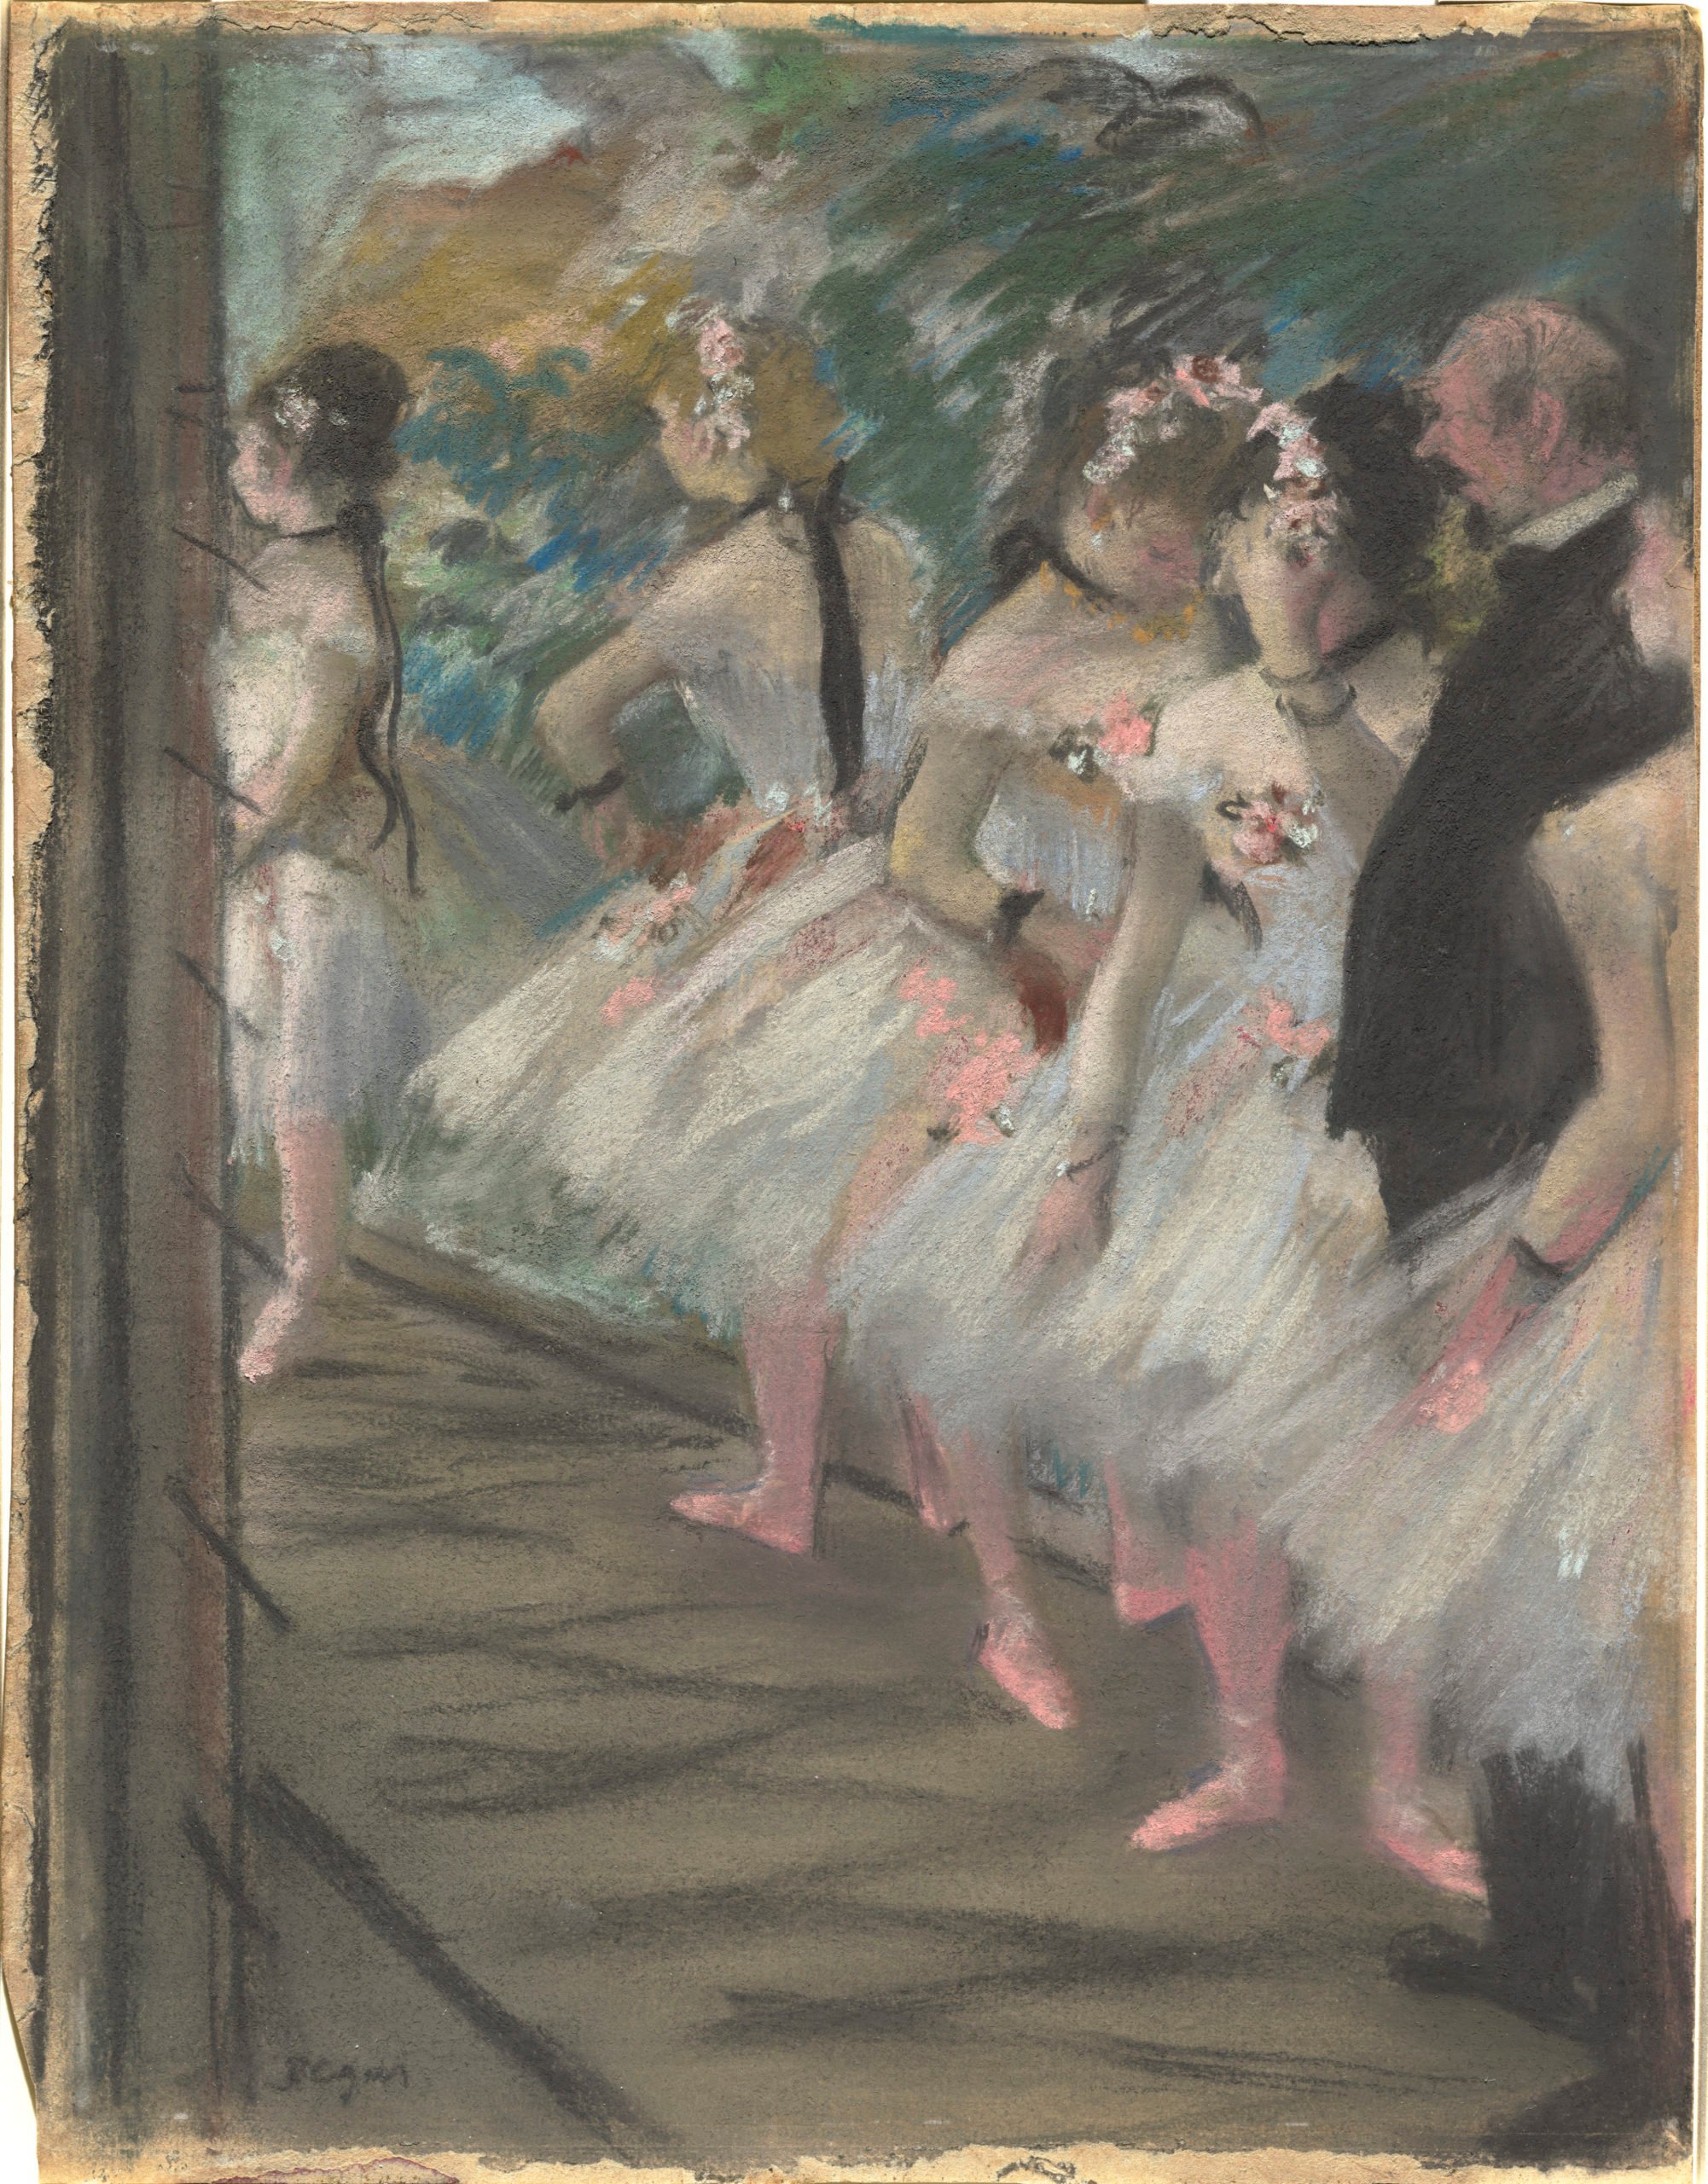 Photograph of “The Ballet” courtesy of National Gallery of Art, Corcoran Collection (William A. Clark Collection)